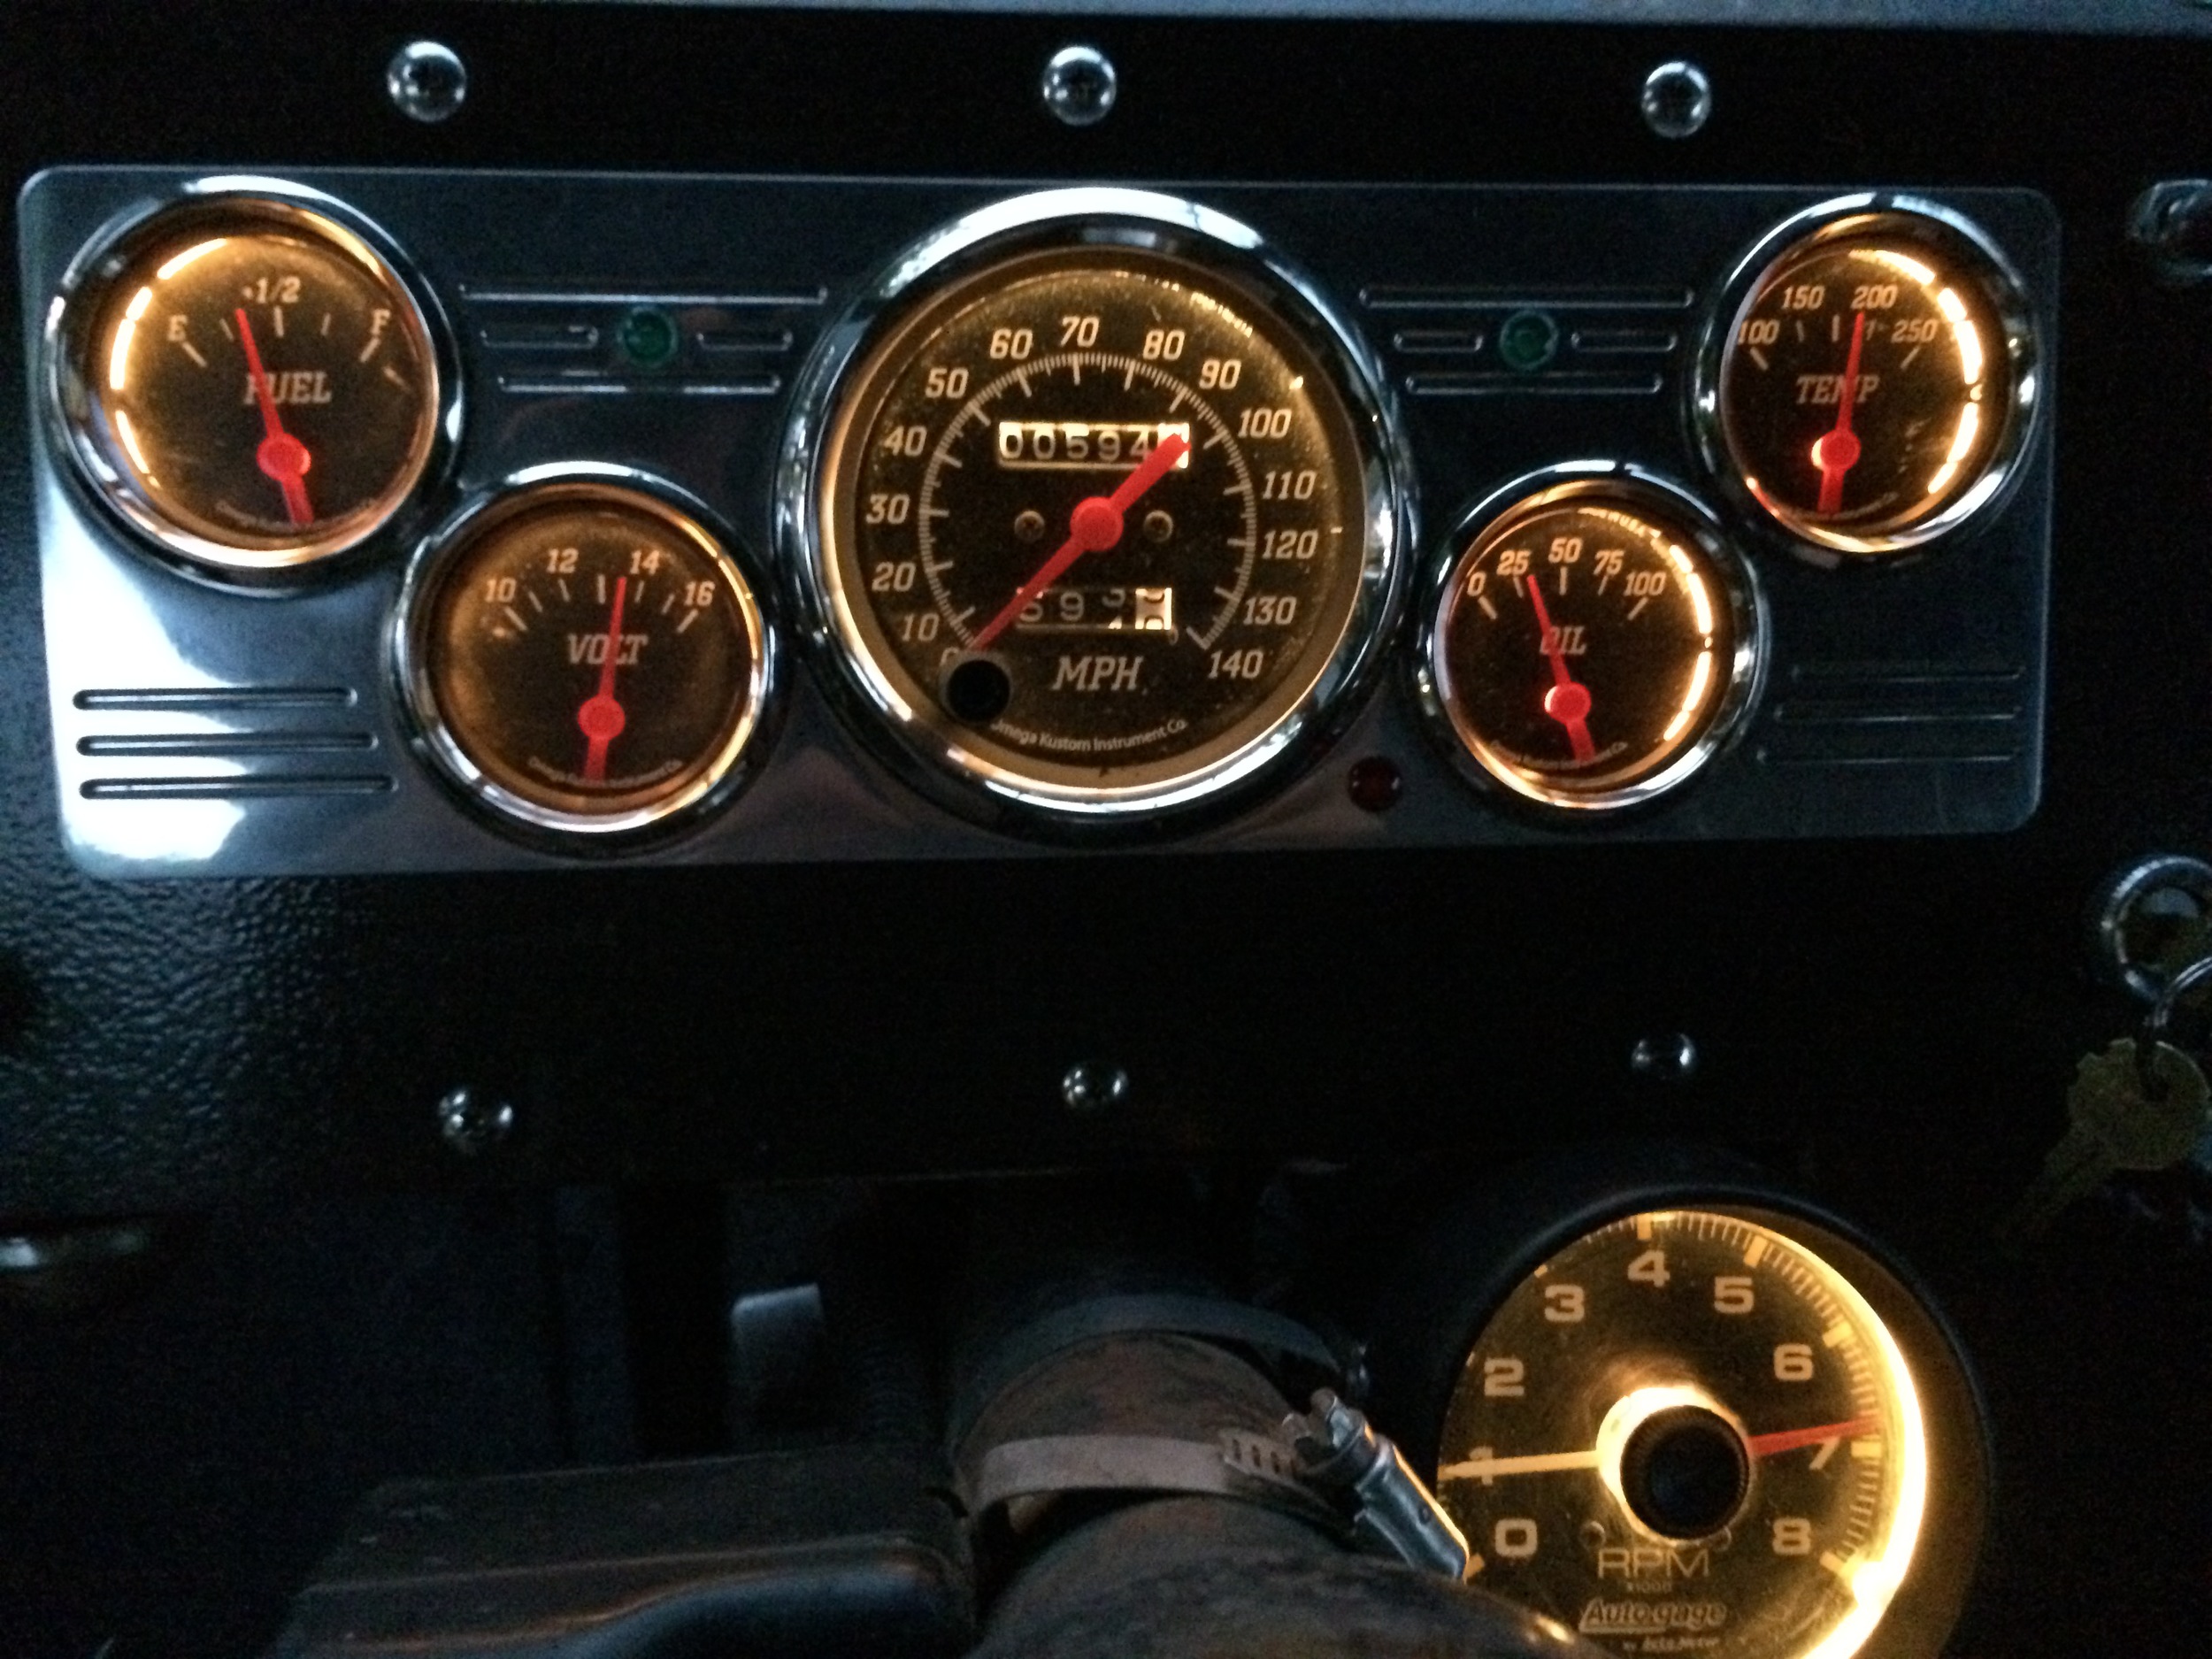  New dash mount and gauges.  Origional mileage unknown. 